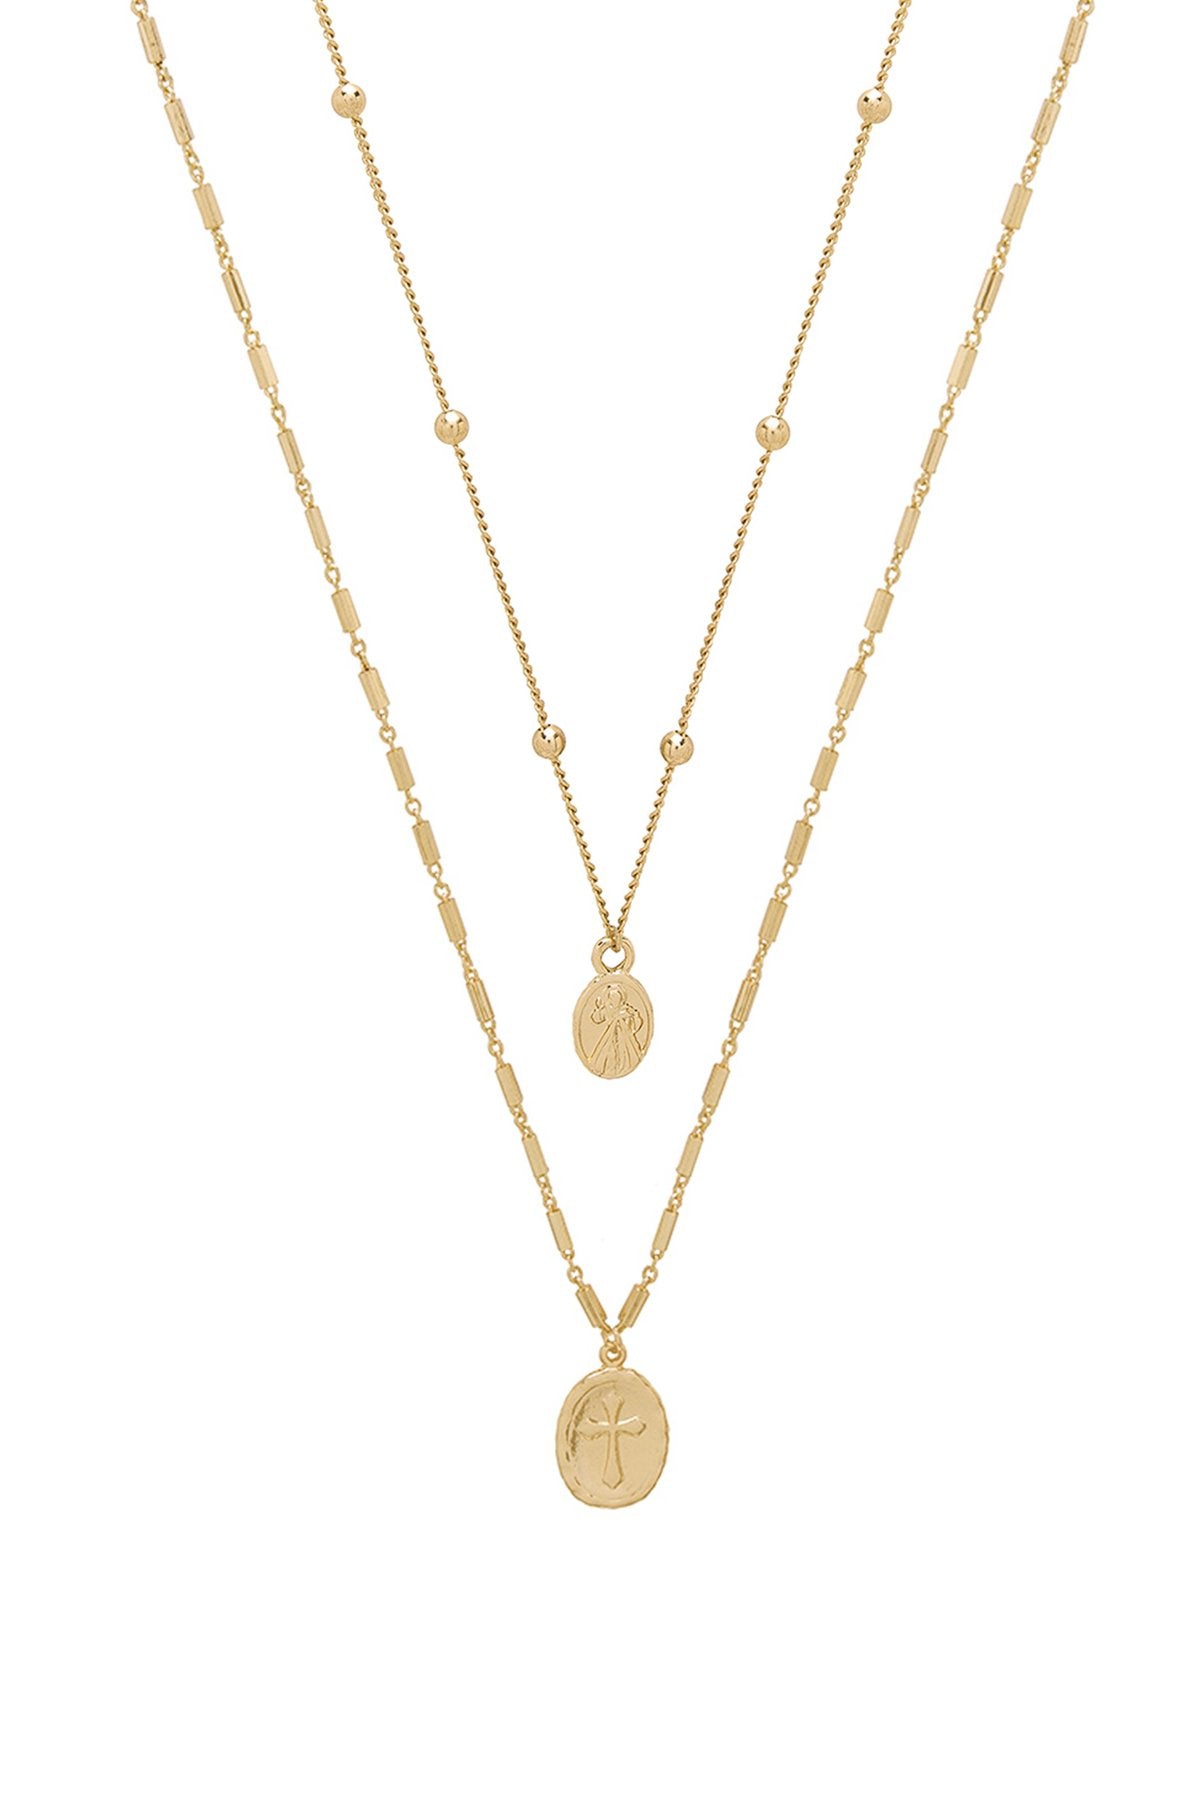 Simple Statement 18k Gold Plated Coin Layered Necklace on white background  